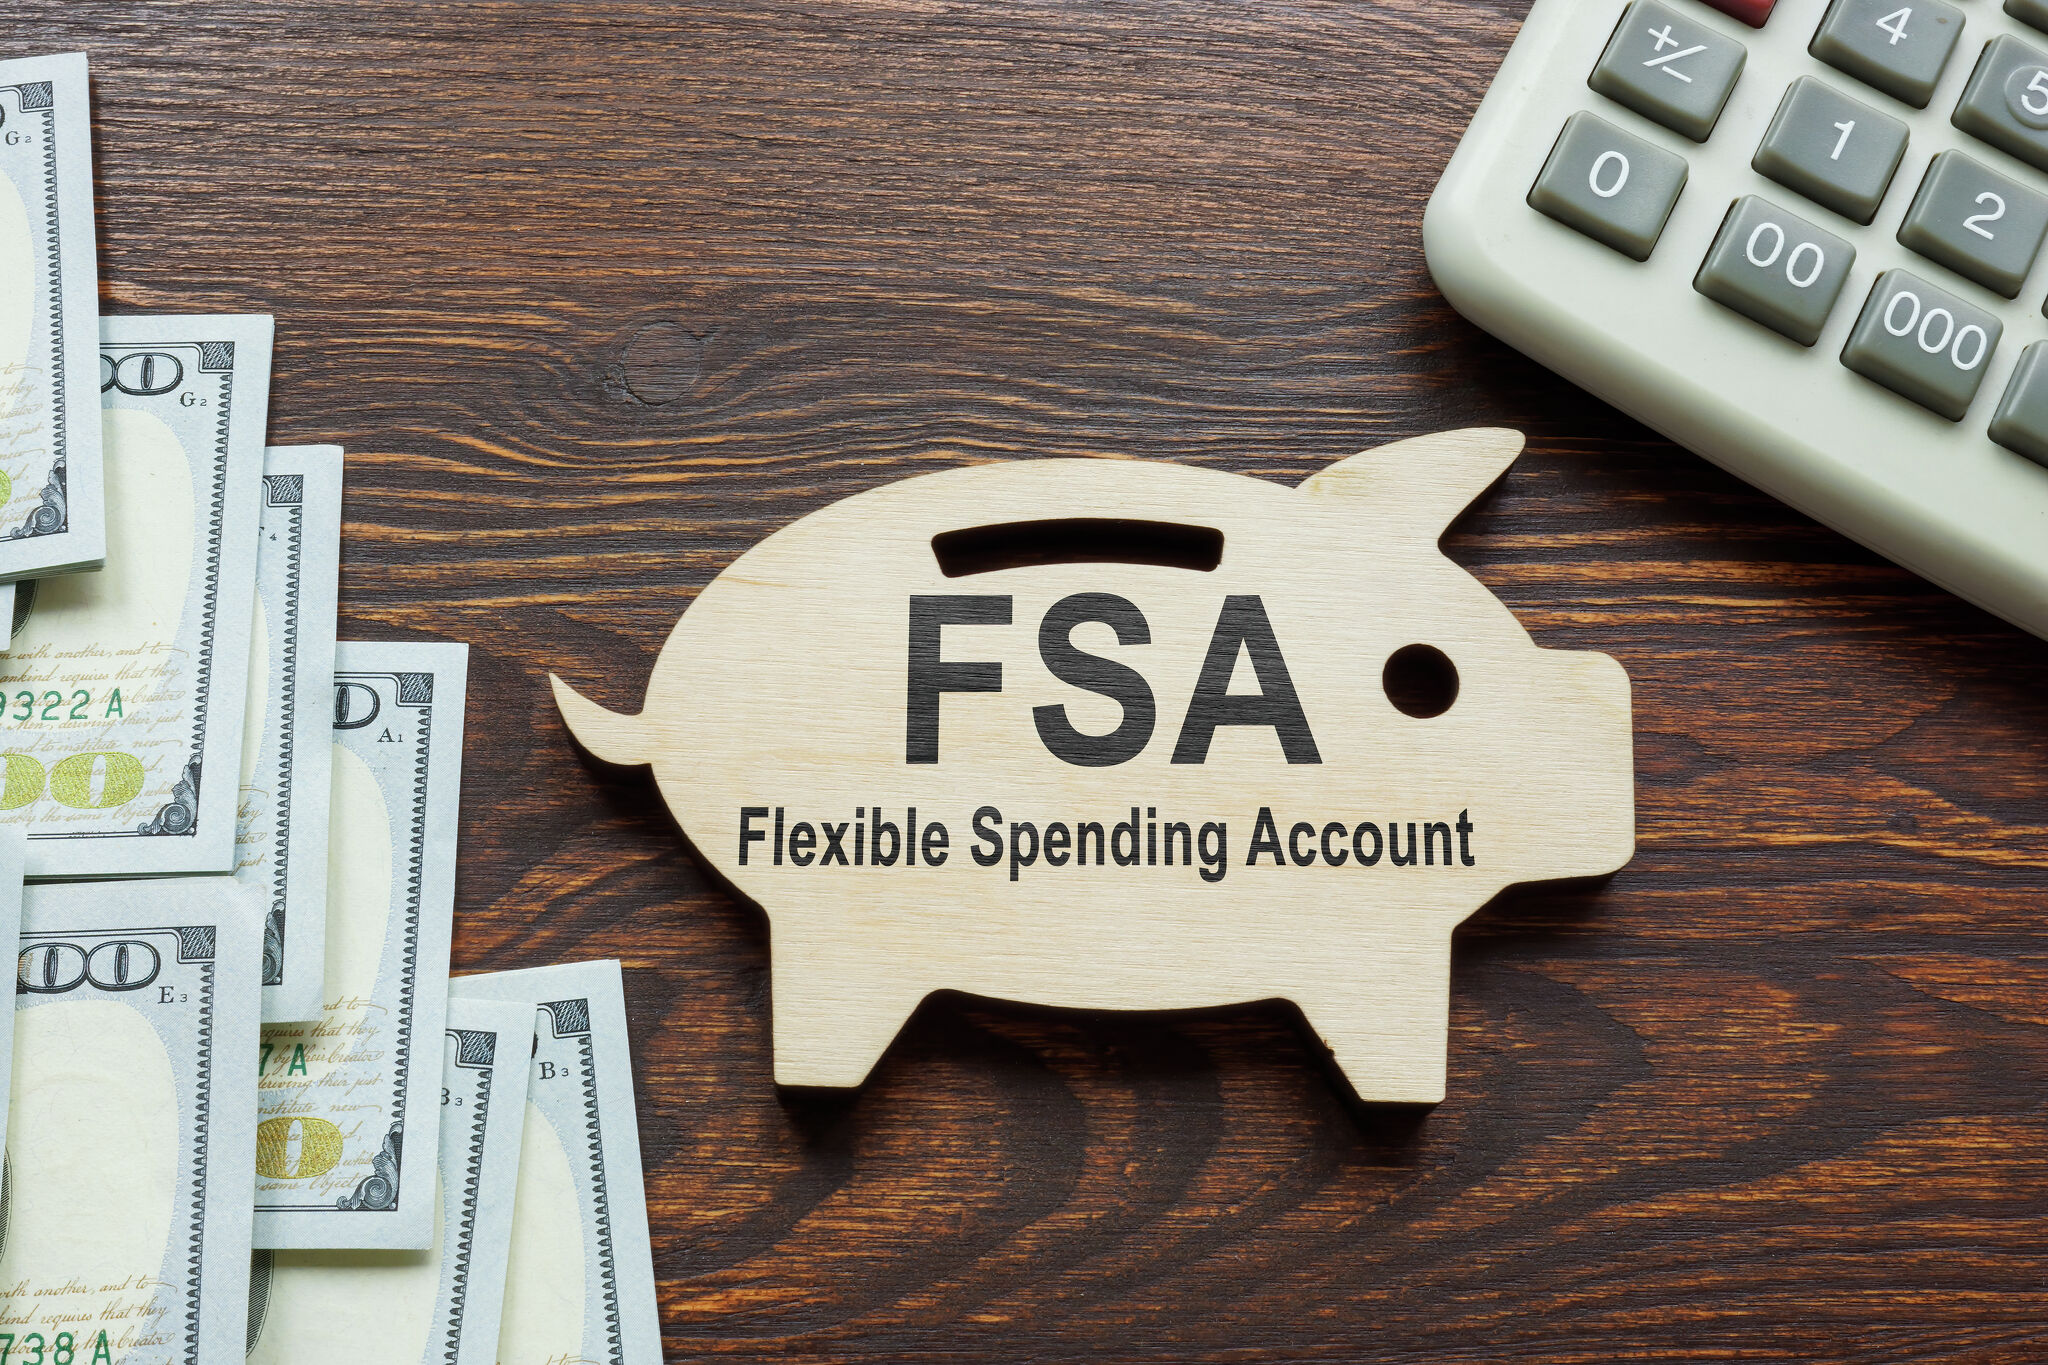 Flexible Spending Account: How to Buy Eligible Items to Use Your Funds – SPY